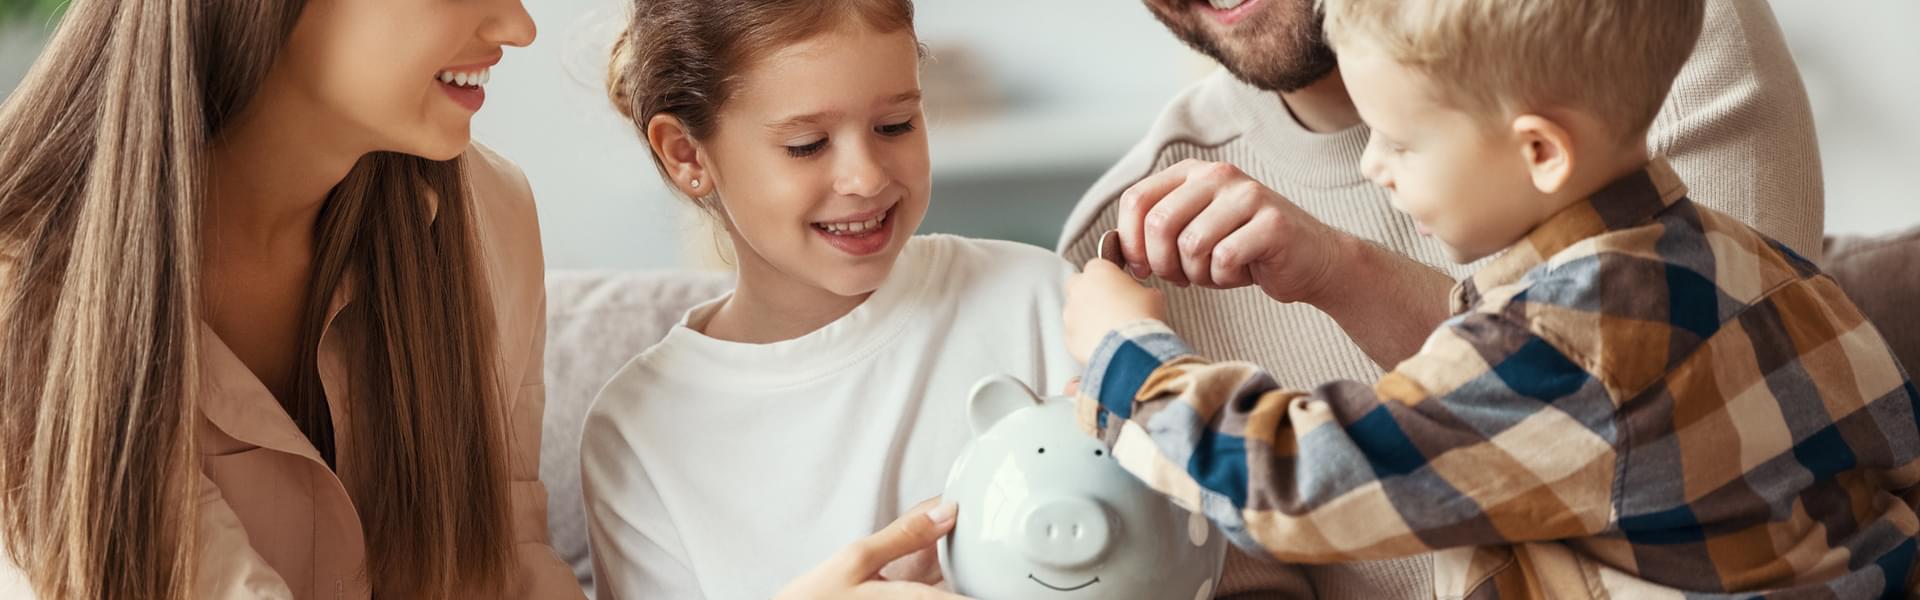 A family putting coins in a piggy bank with their children.